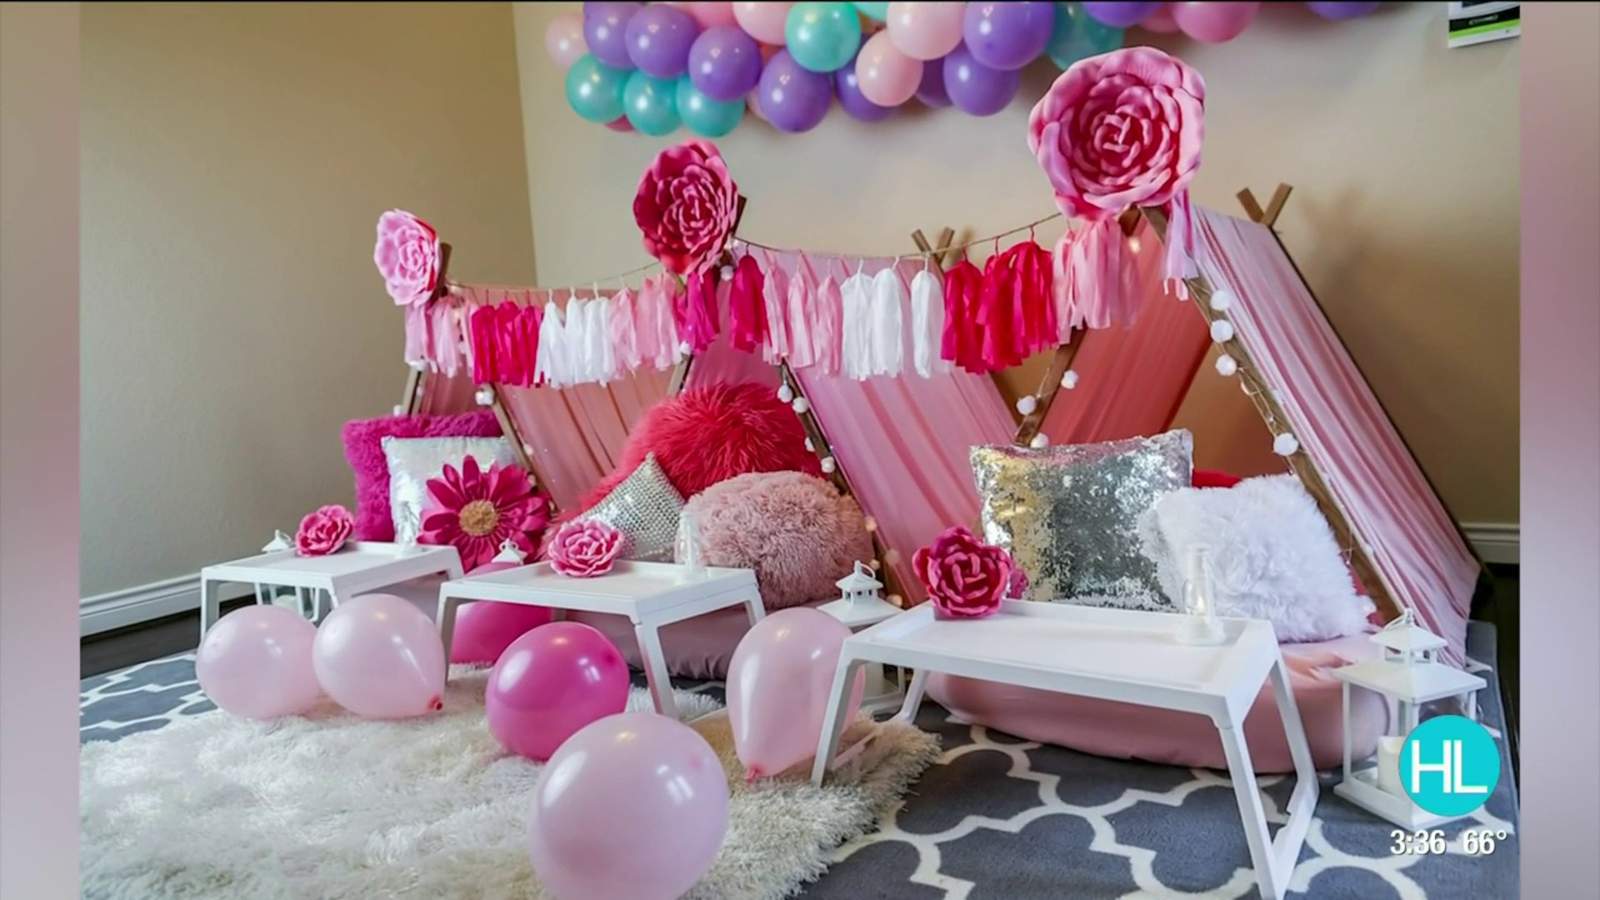 Woodlands mom creates ‘The Slumber Party Club’ for fun and unique slumber party experience